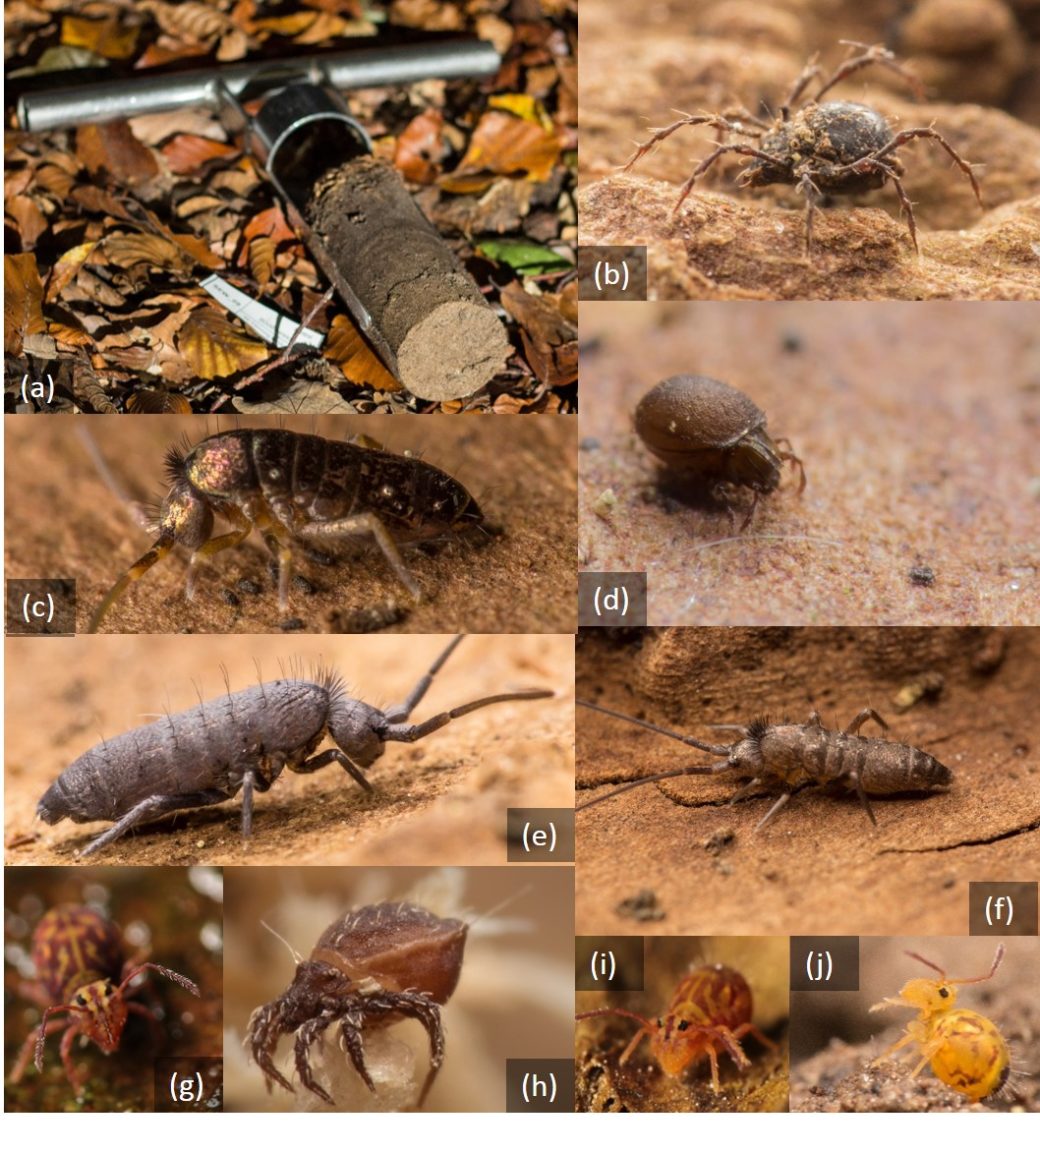 Picture: The collage contains ten photos, nine of which show soil mesofauna. Photo 1 shows a short Macfayden's core drill lying on withered beech foliage with a cylindrical soil core drilled out in the tube half open lengthwise. Photos 2 to 4 show specimens of horn mites, Latin Oribatida. Photos 5 to ten show specimens of springtails, Latin Collembola.